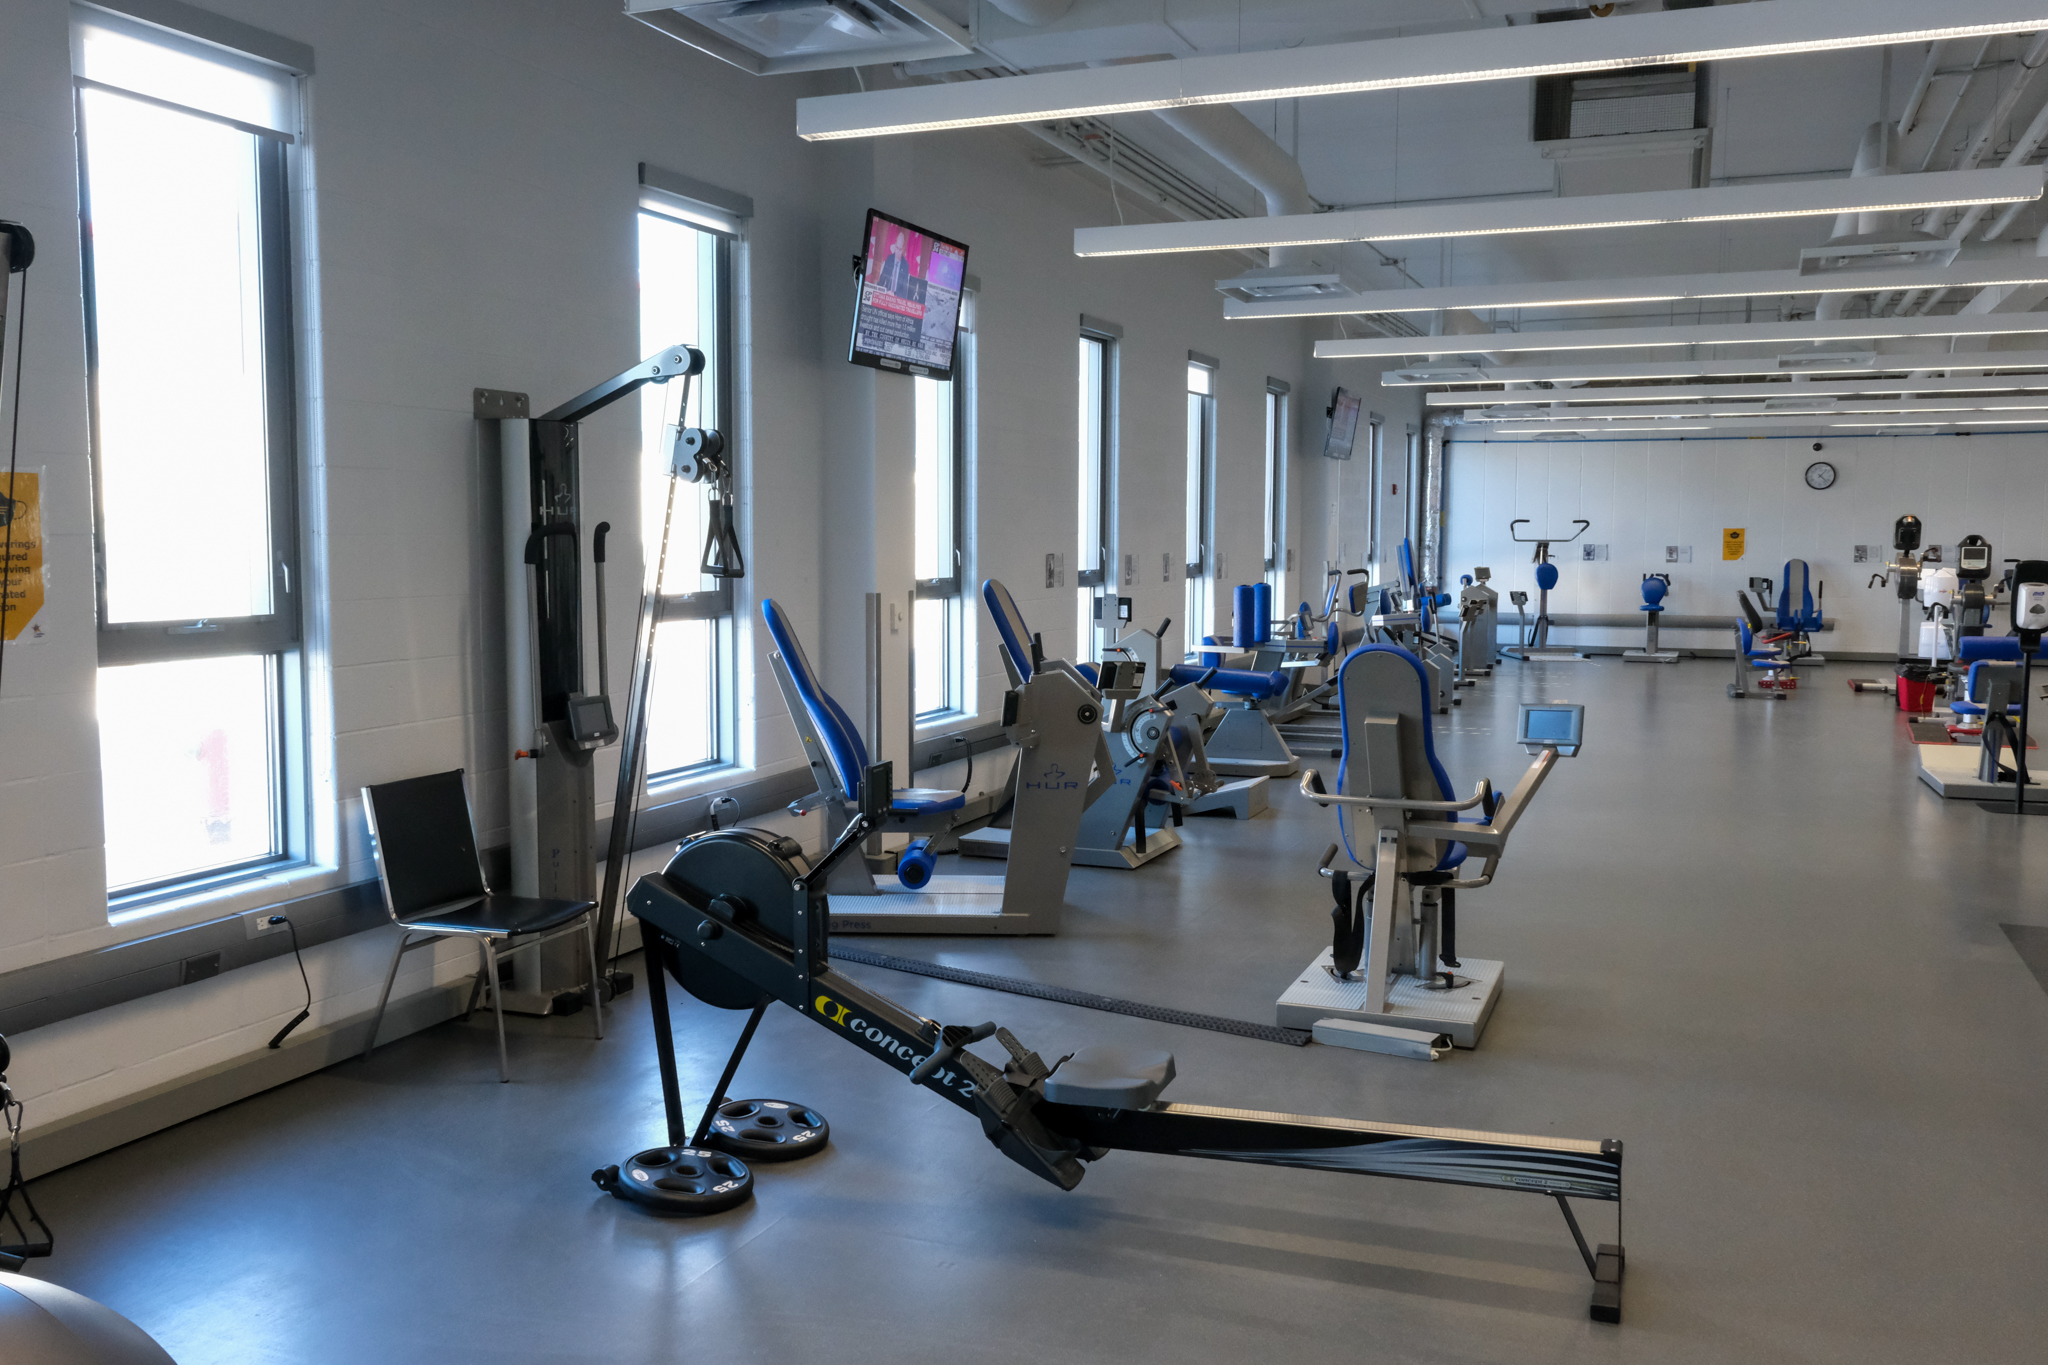 Excercise equipment at the Abilities Centre.